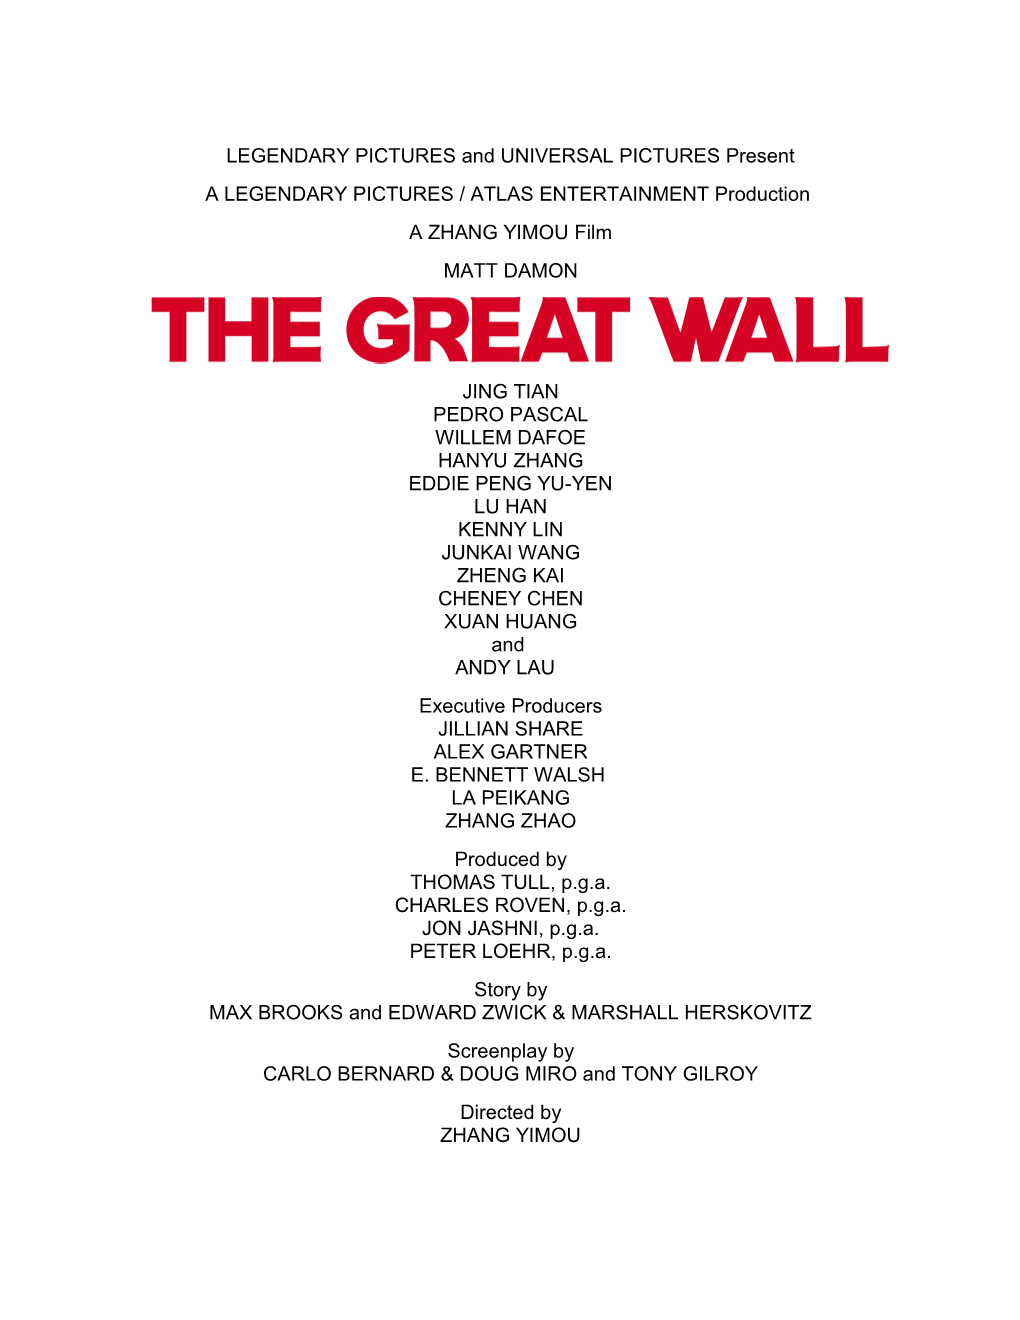 The Great Wall Production Information 21